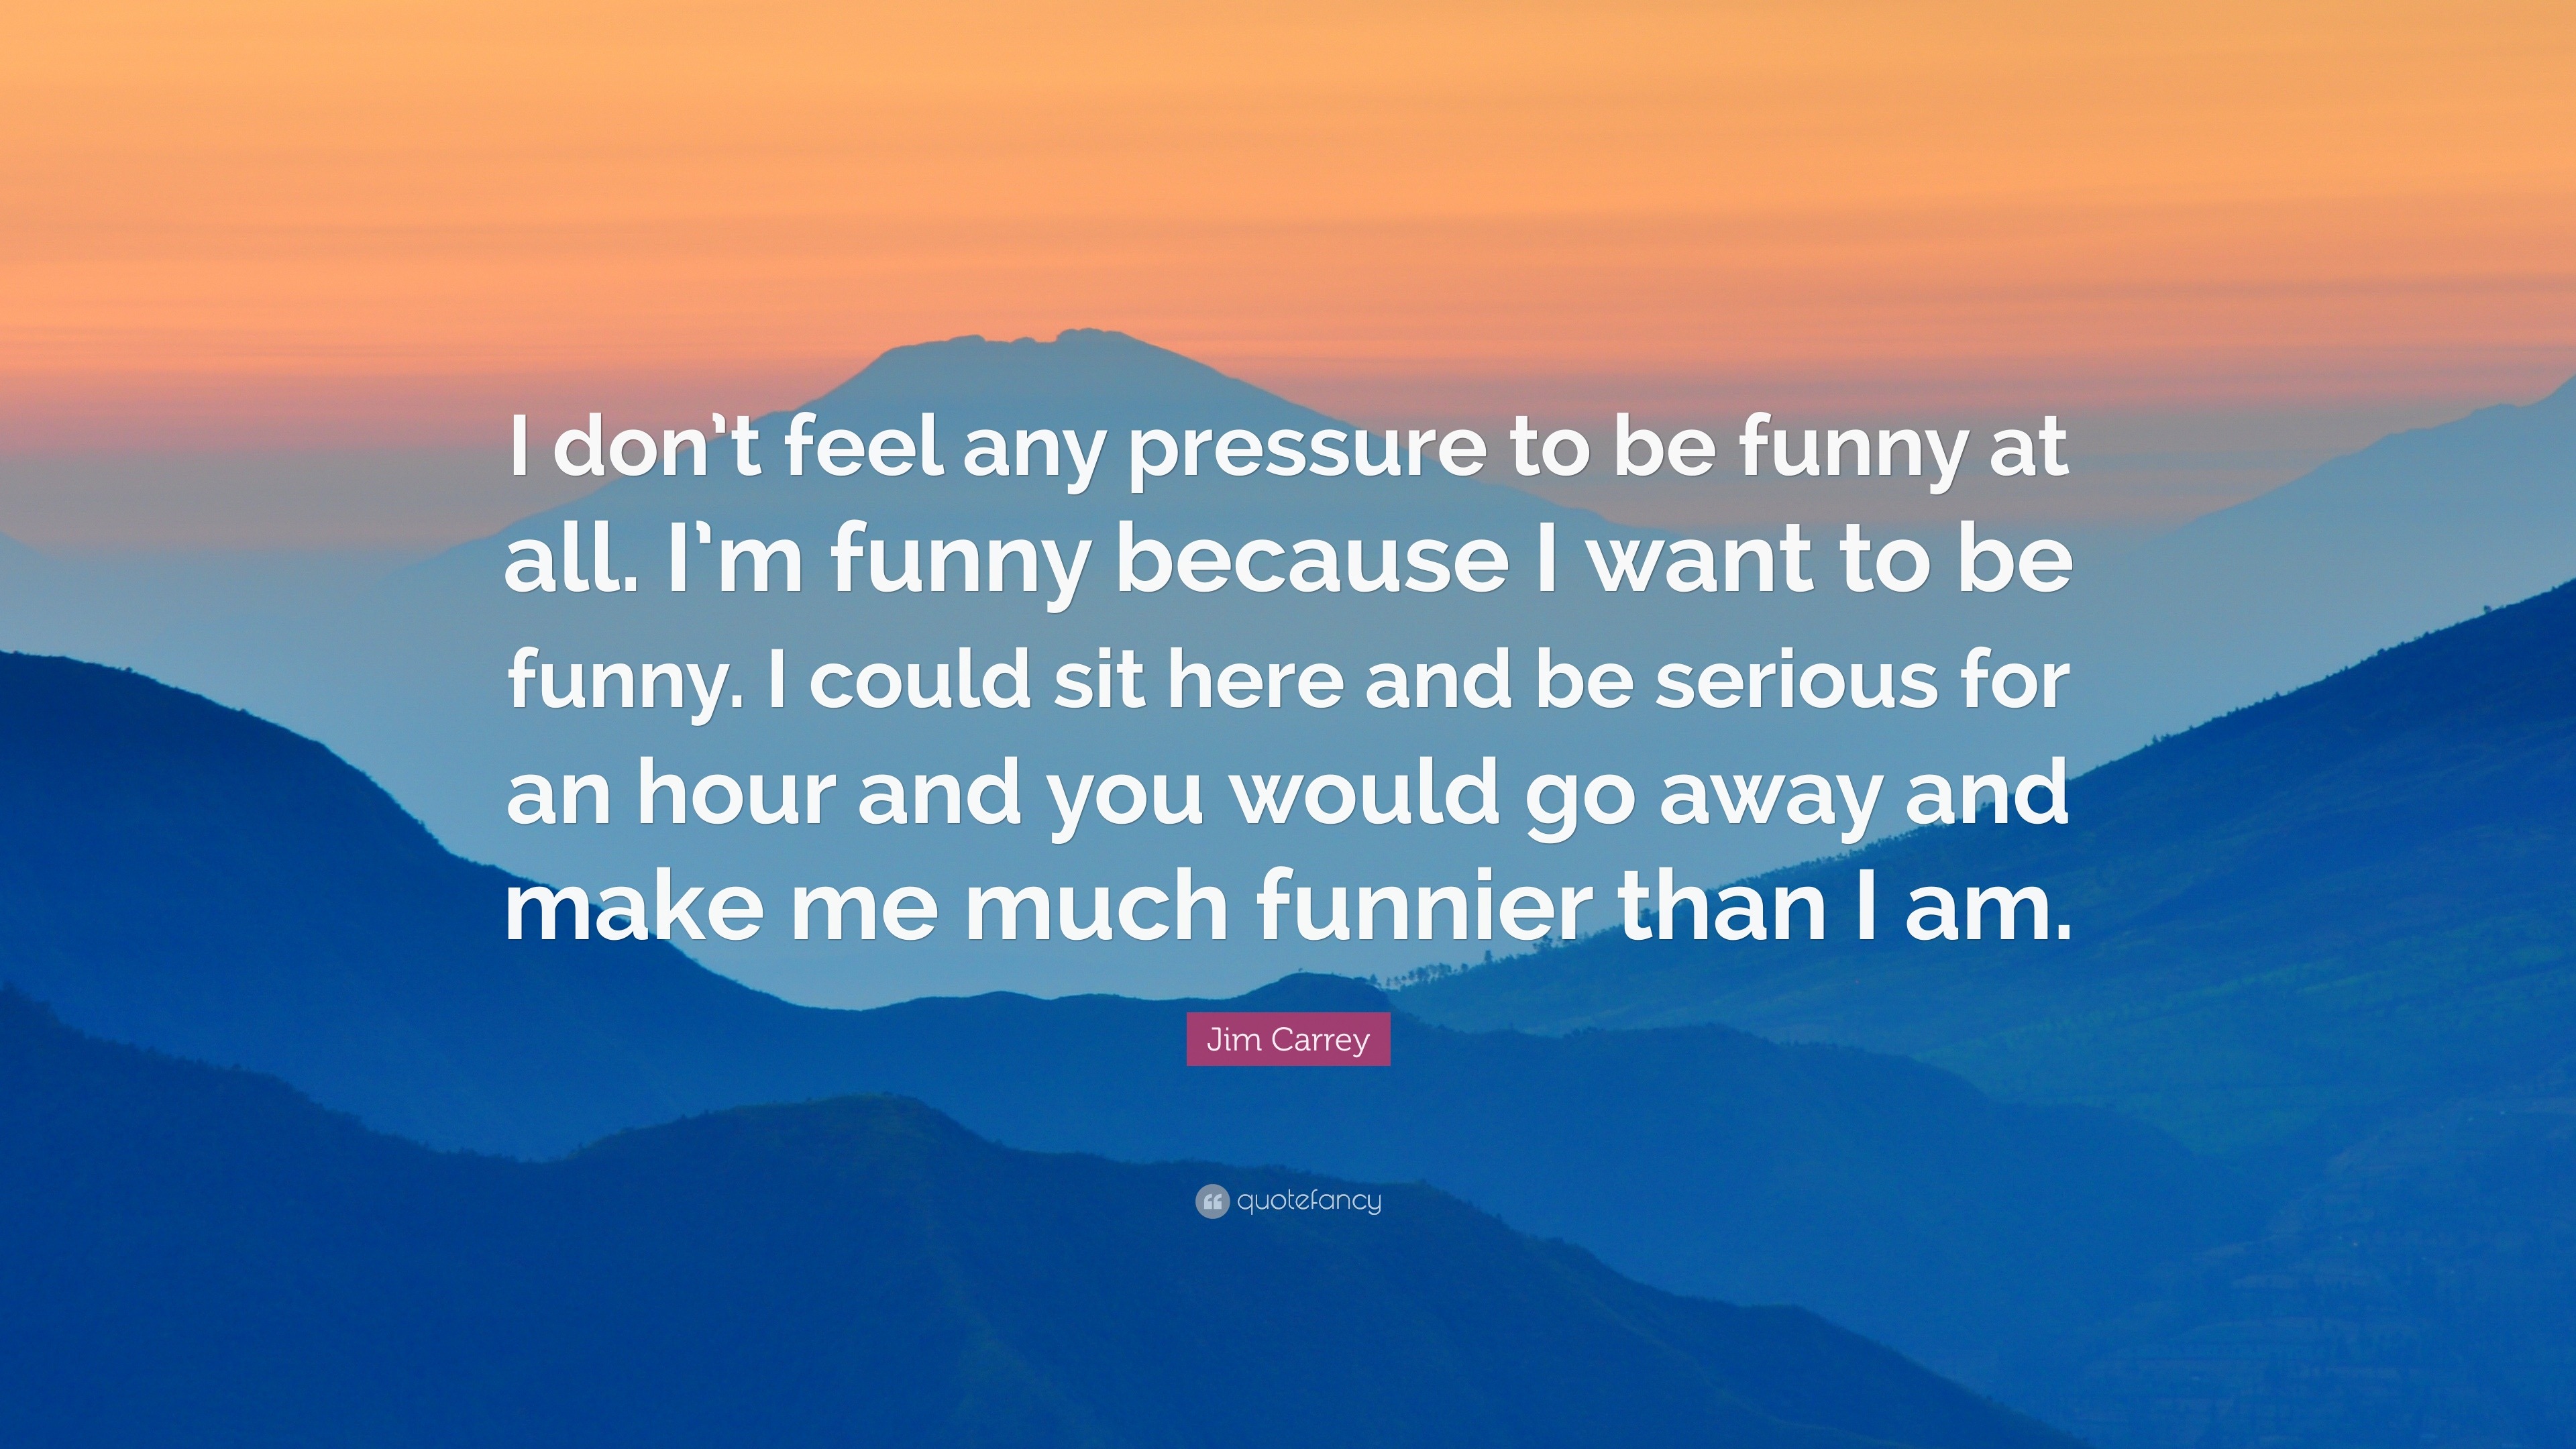 Jim Carrey Quote: “I don't feel any pressure to be funny at all. I'm funny  because I want to be funny. I could sit here and be serious for ...”